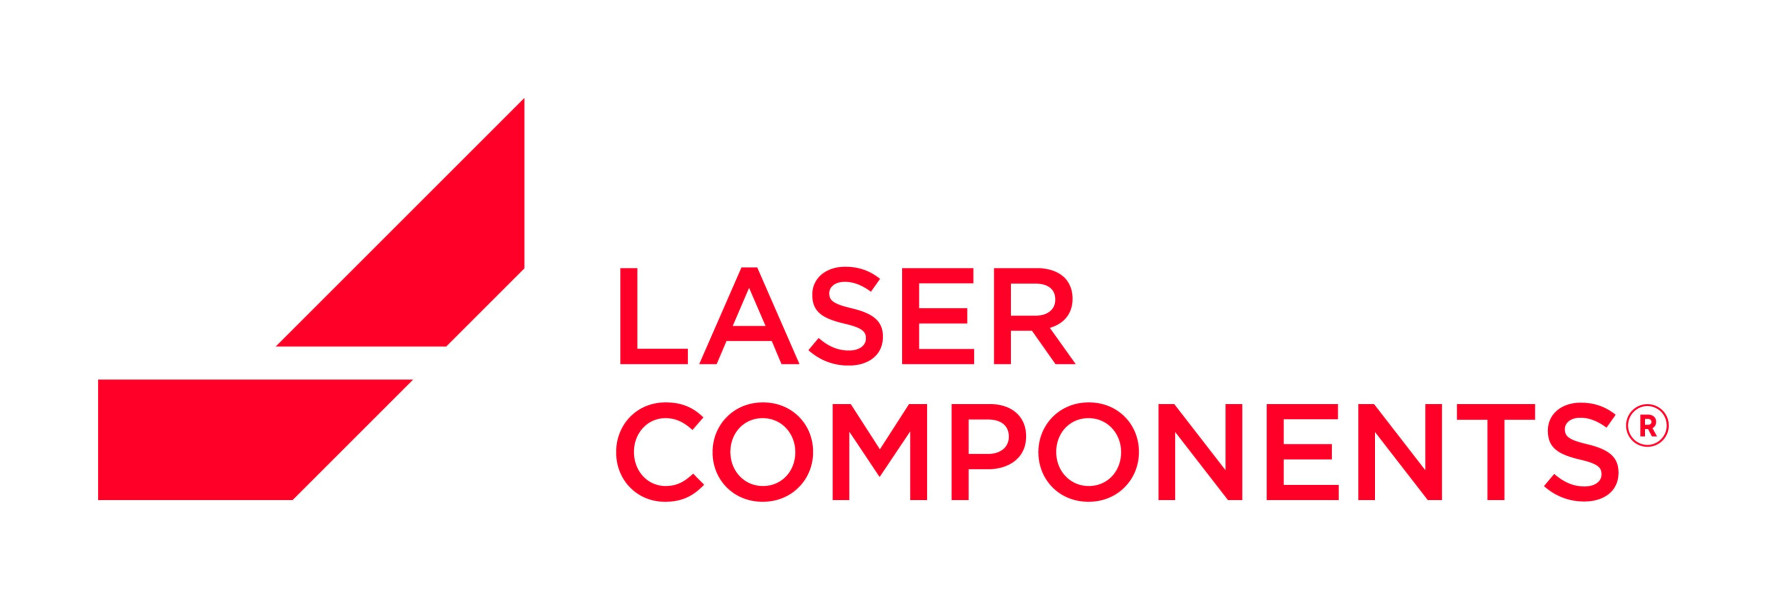 LASER COMPONENTS Germany GmbH//Lasercomponents